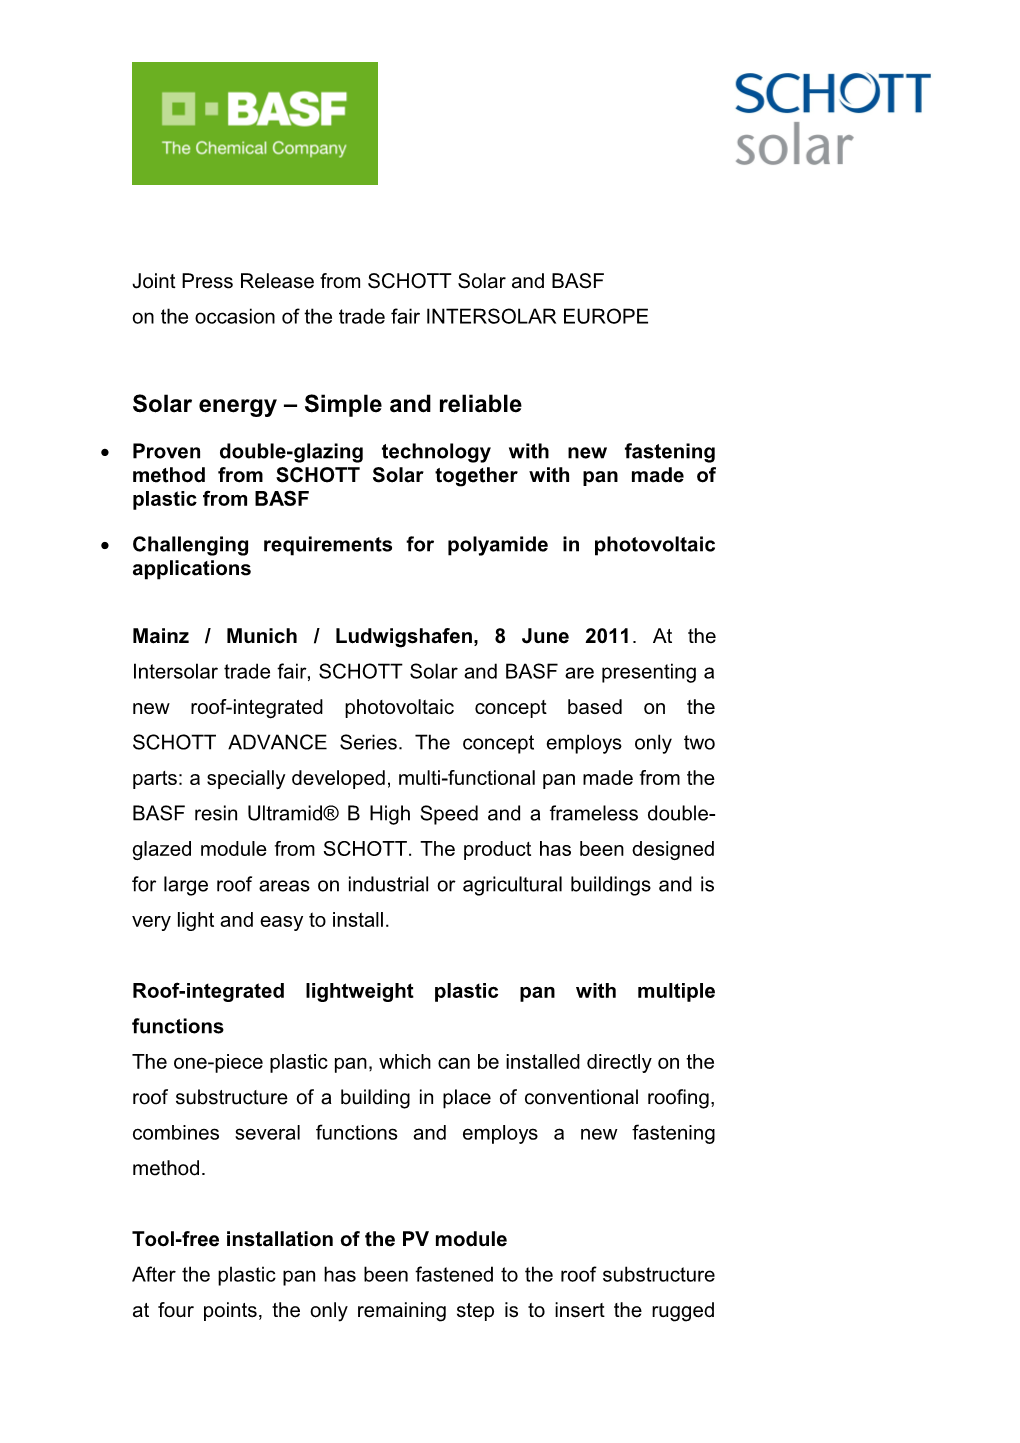 Joint Press Release from SCHOTT Solar and BASF